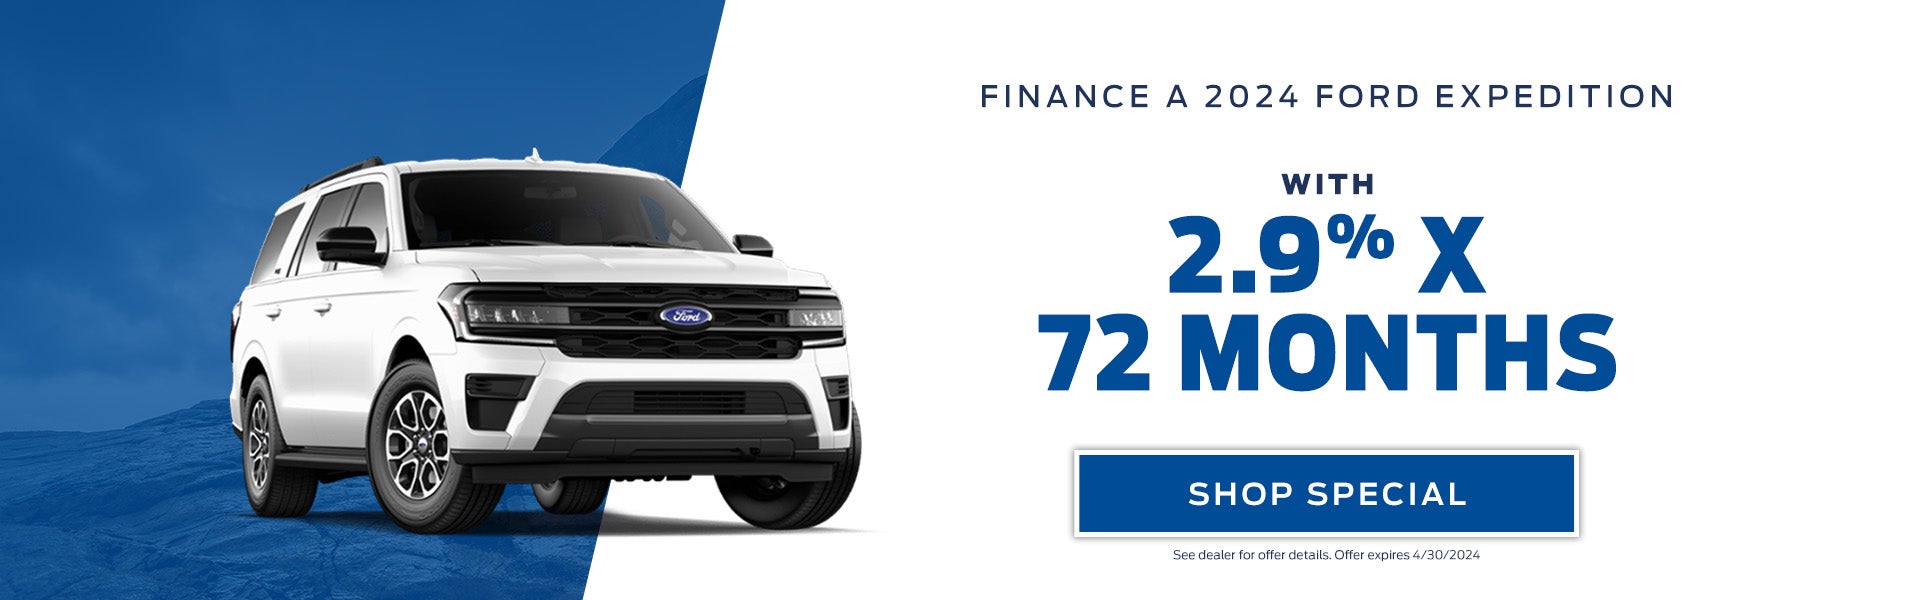 Finance a 2024 Ford Expedition with 2.9% X 72 Months 